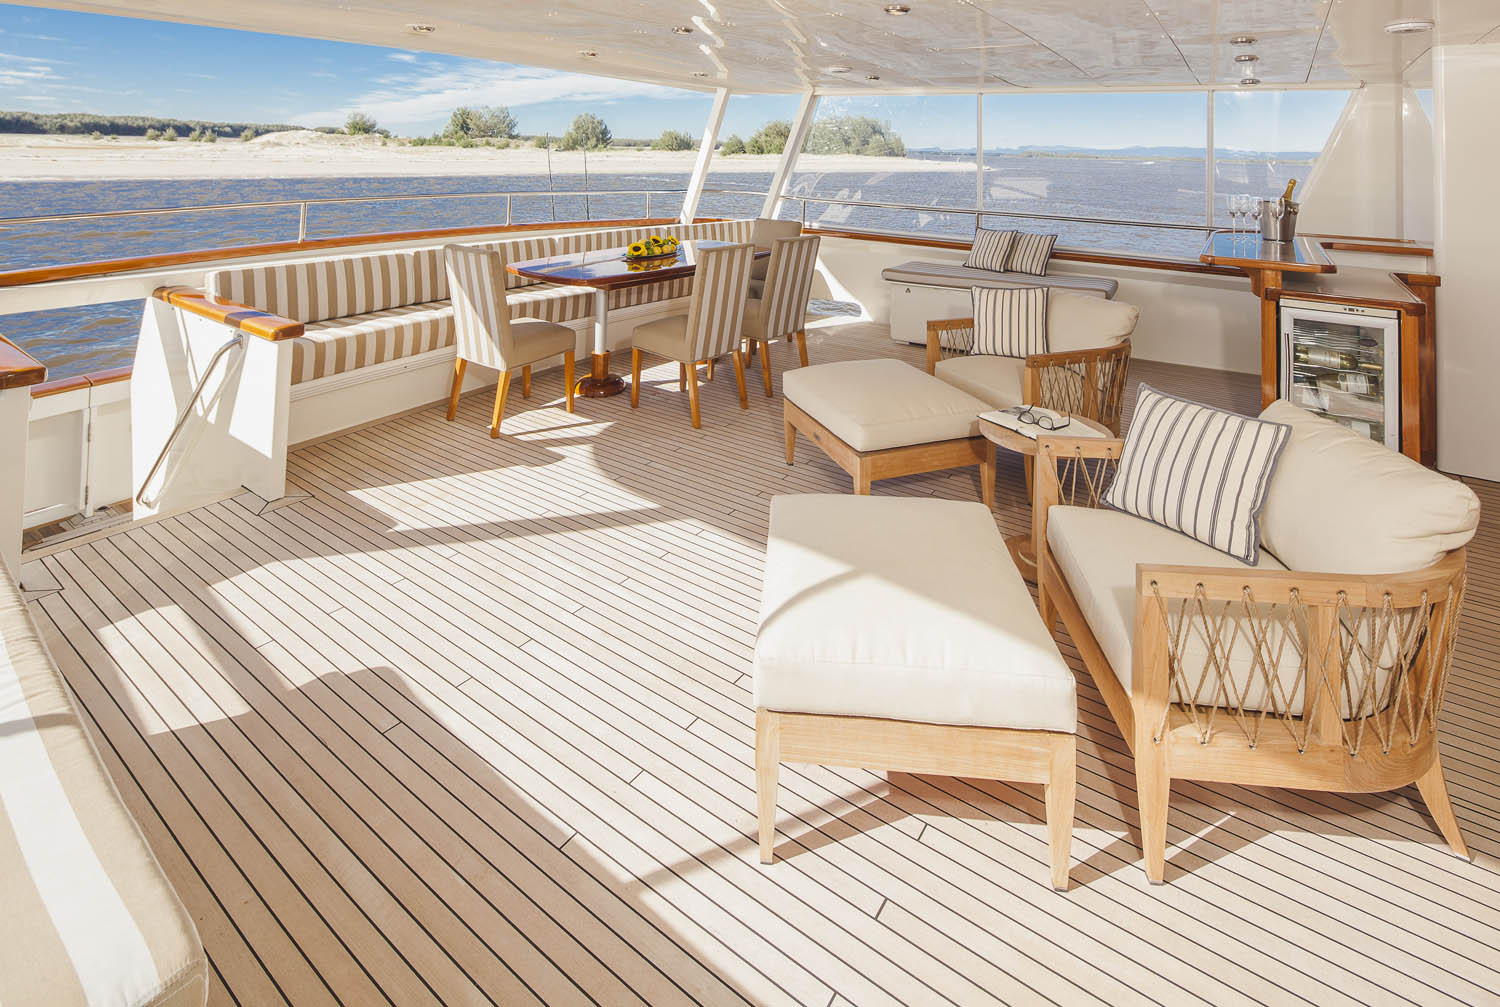 M/Y Silent World II yacht for sale deck lounge